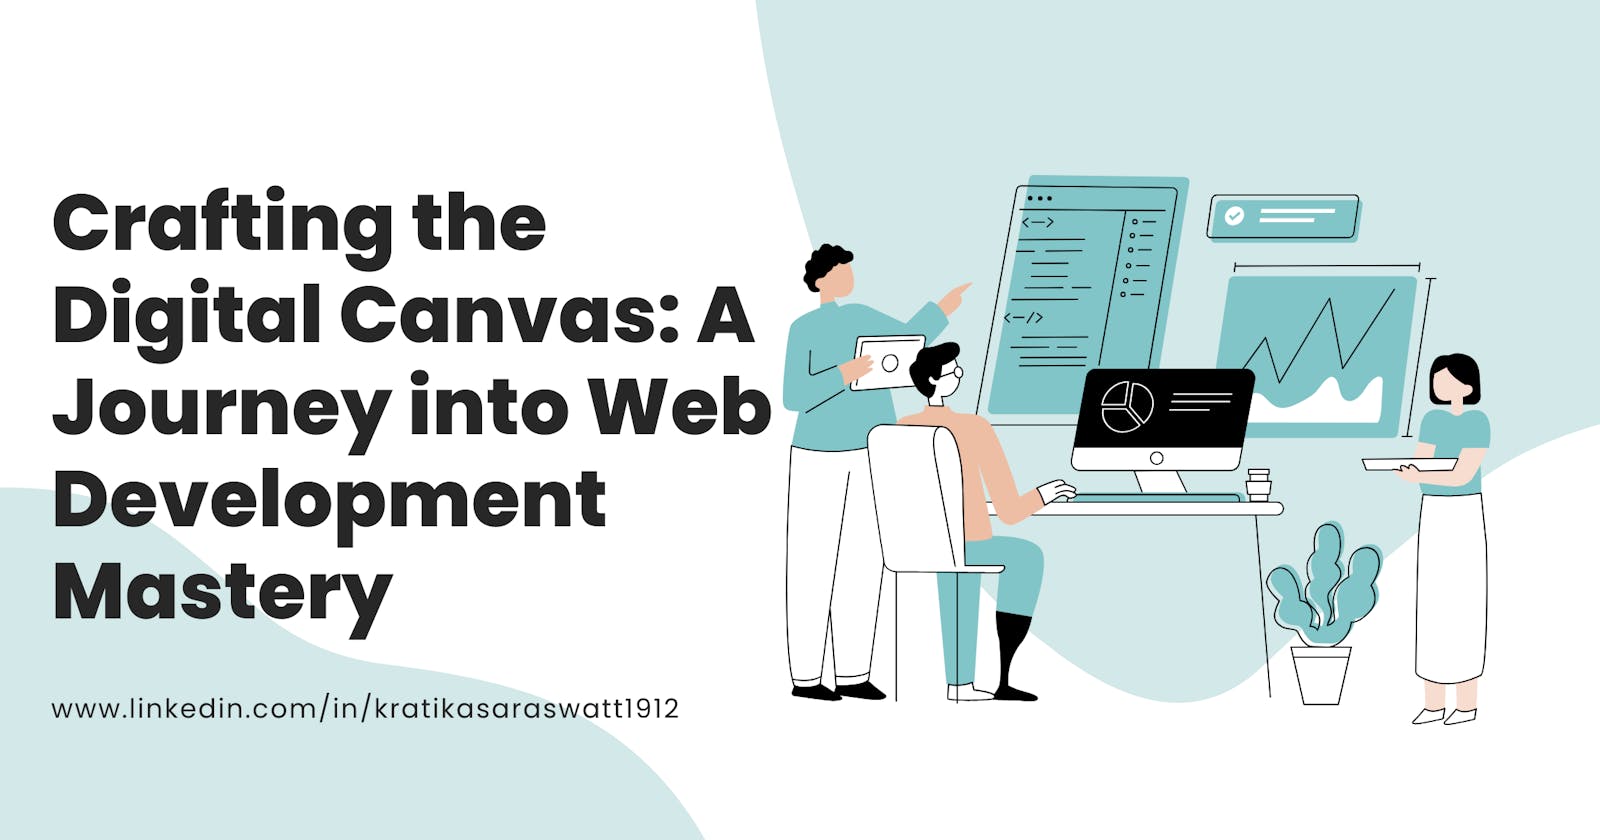 Crafting the Digital Canvas: A Journey into Web Development Mastery